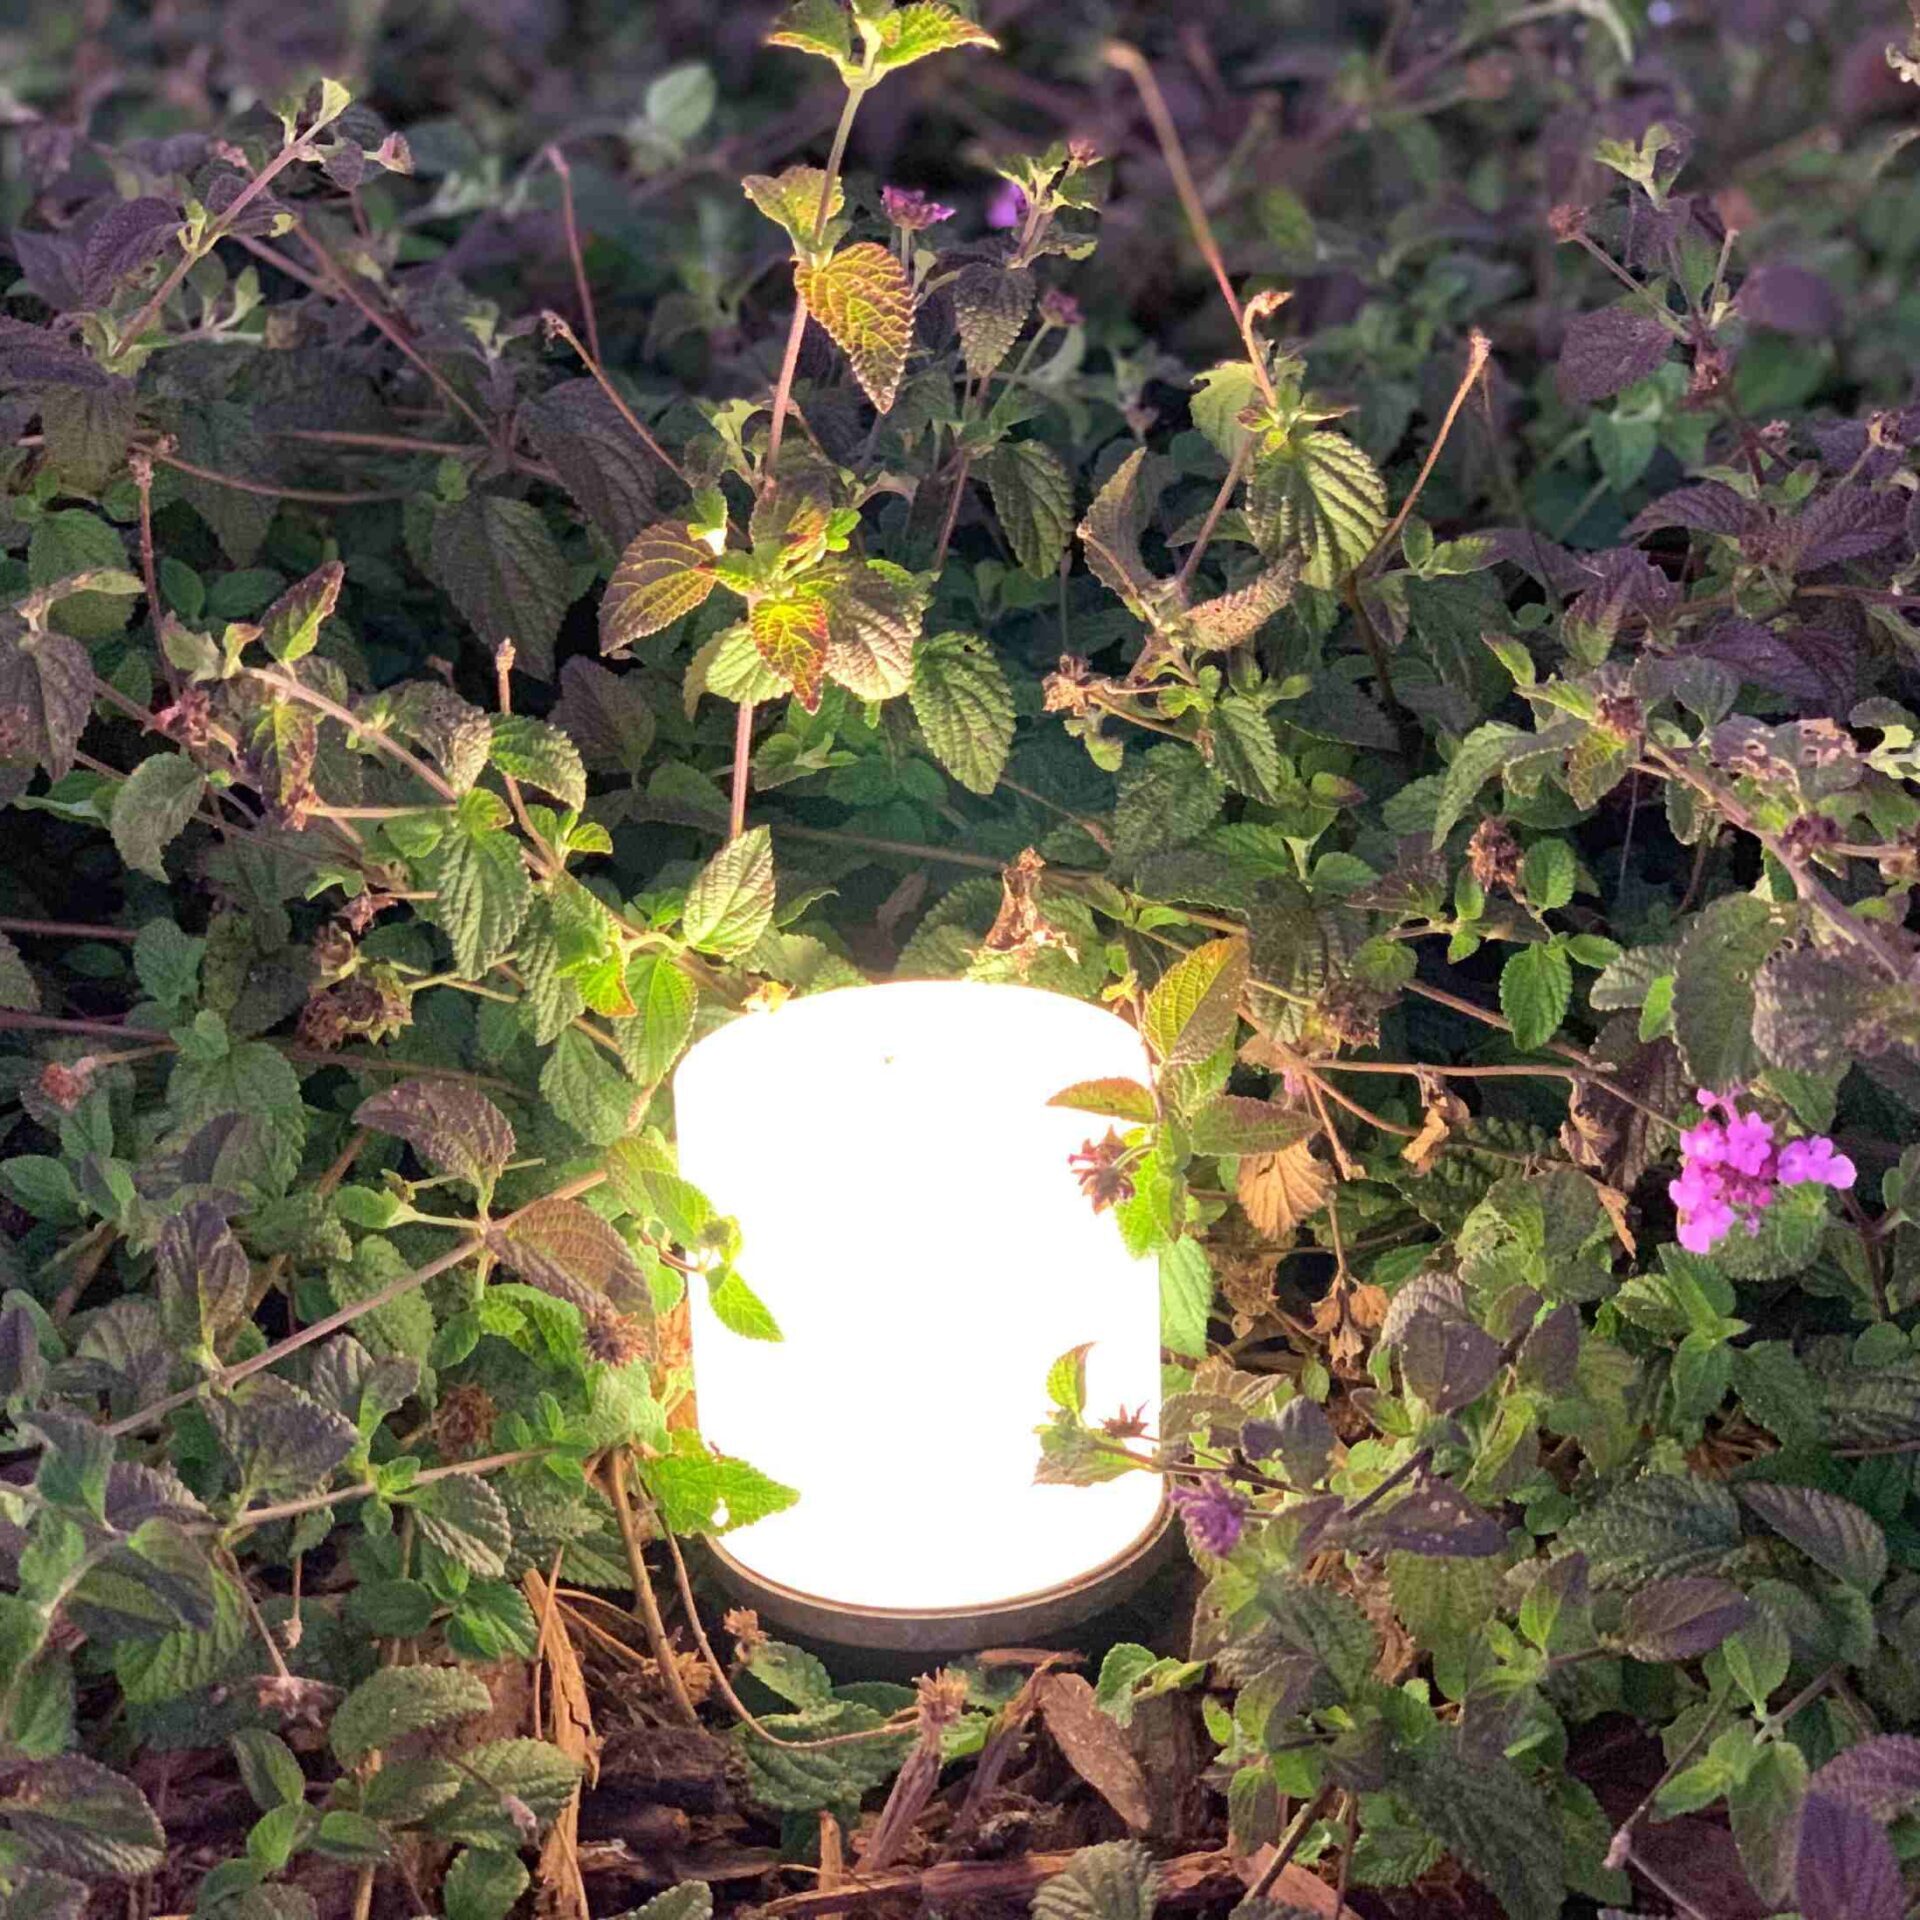 A lamp in between the leaves